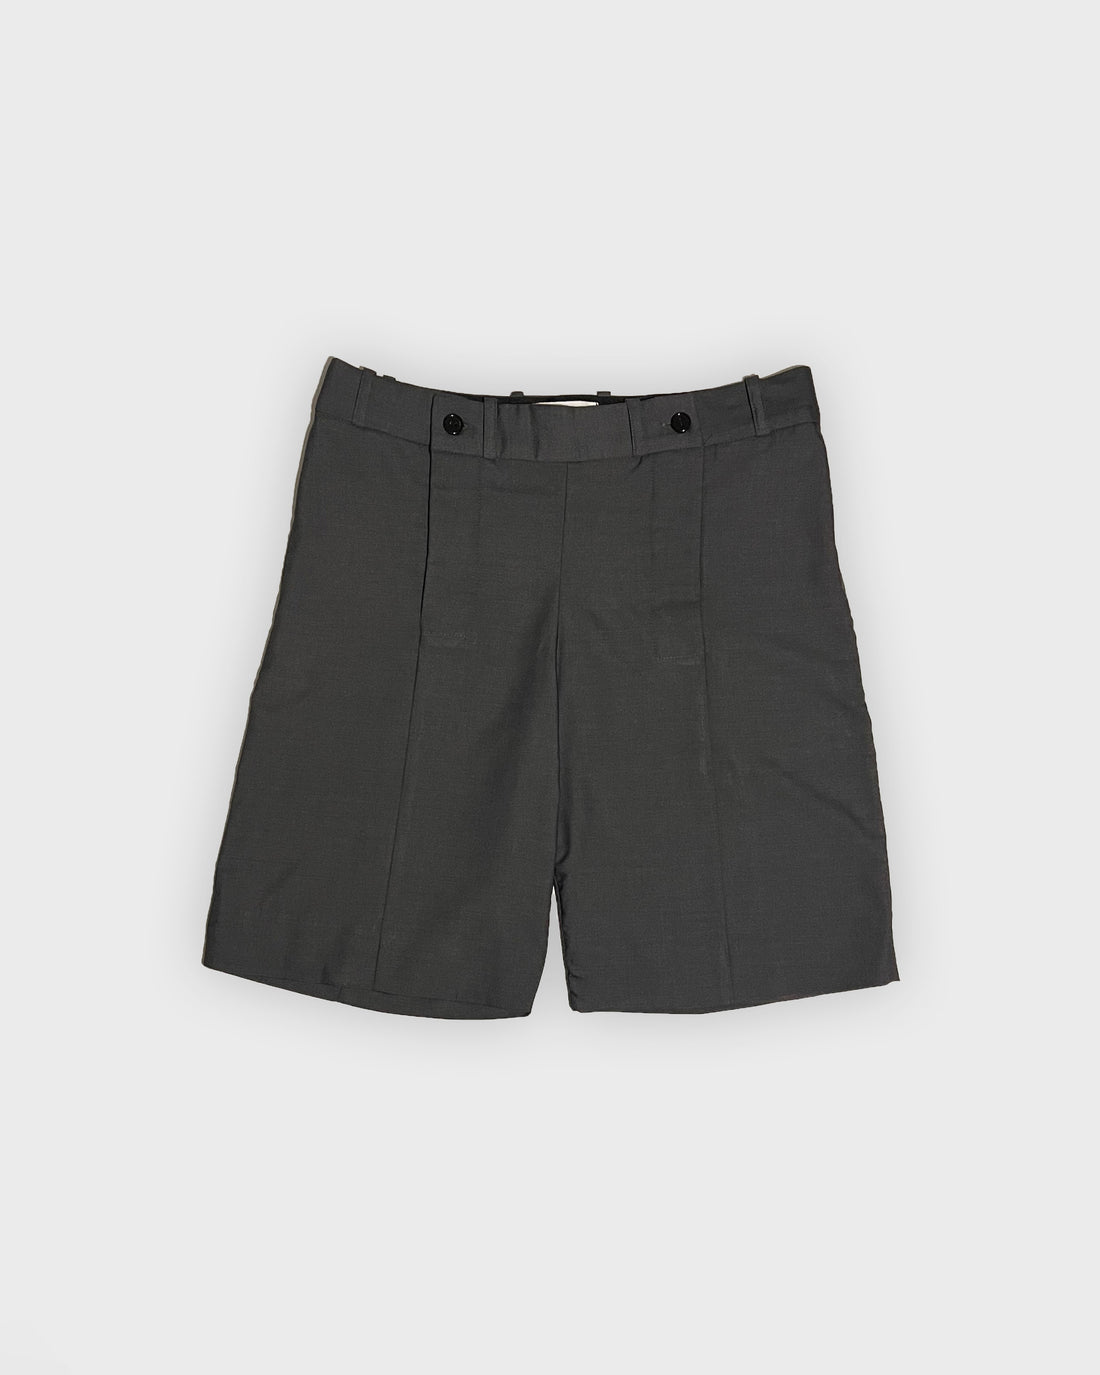 SHORTS WITH TWO FLY FRONTS (GREY)